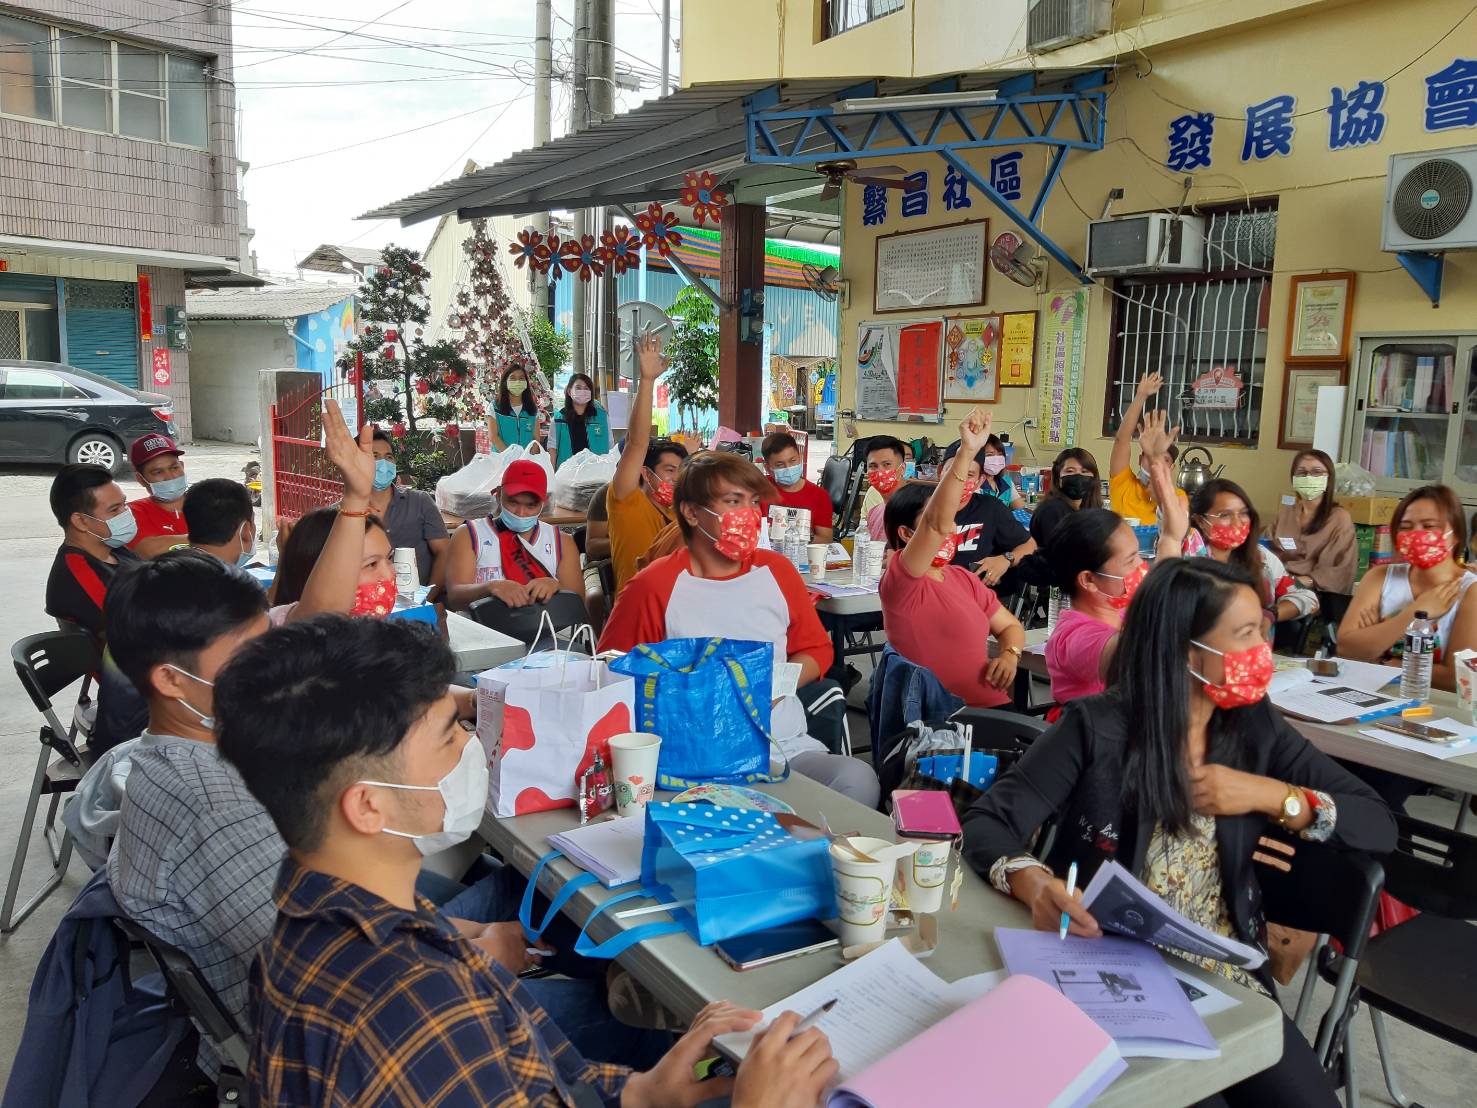 The Pingtung County Government regularly announces decrees to the migrant workers. Photo/Provided by Pingtung County Government